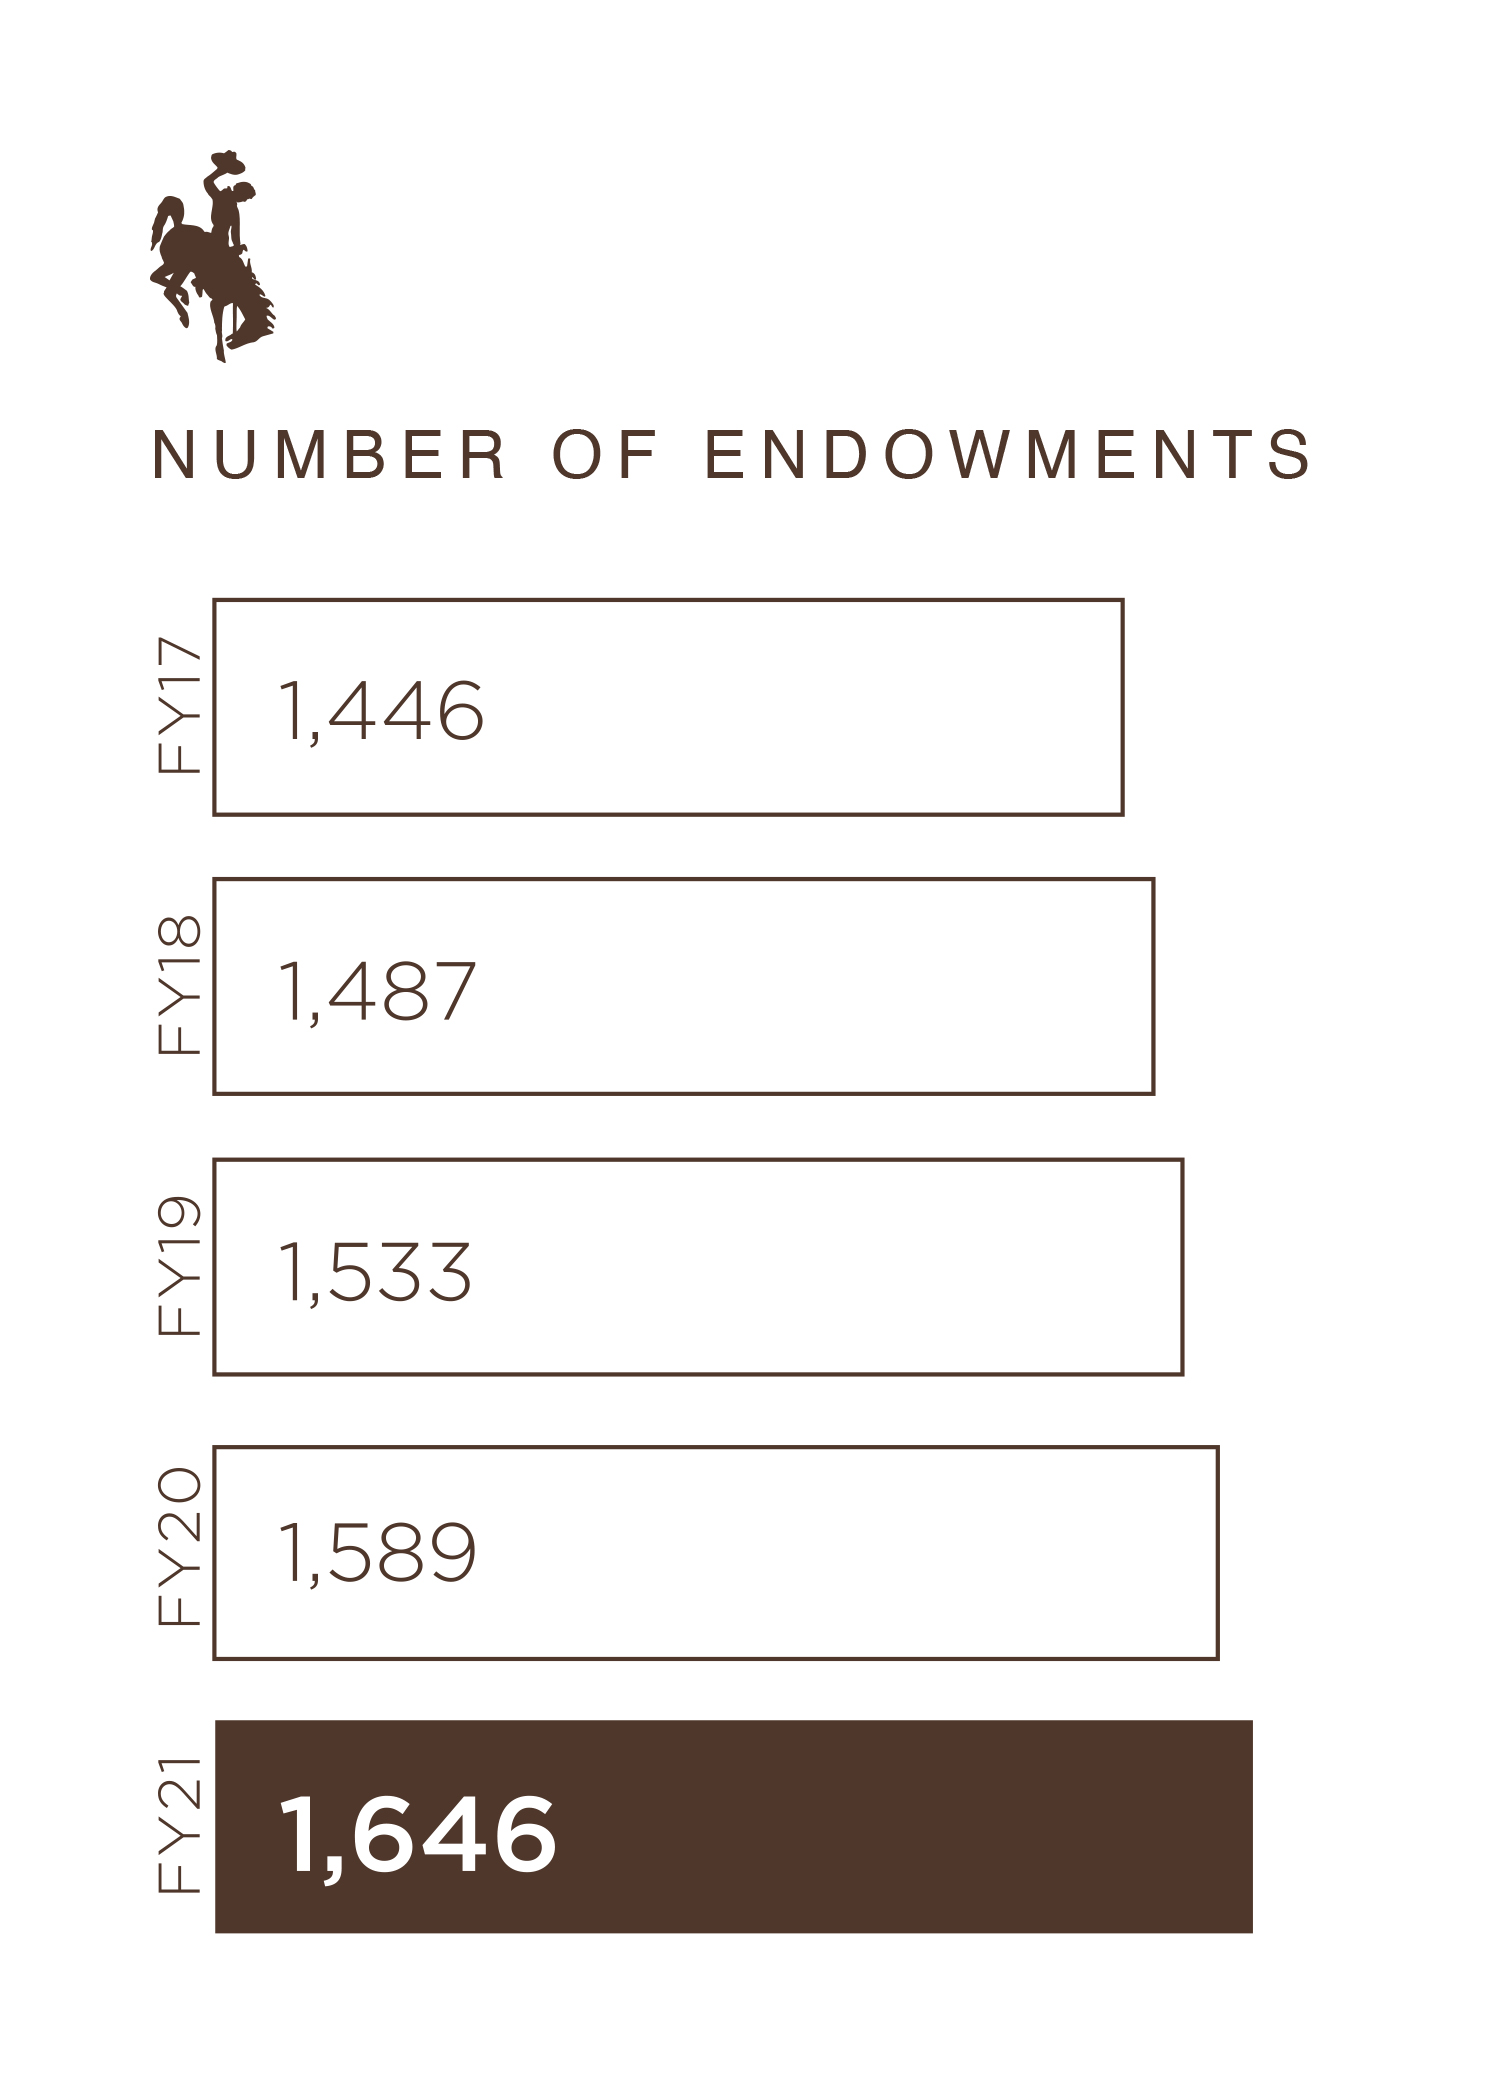 Number of endowments